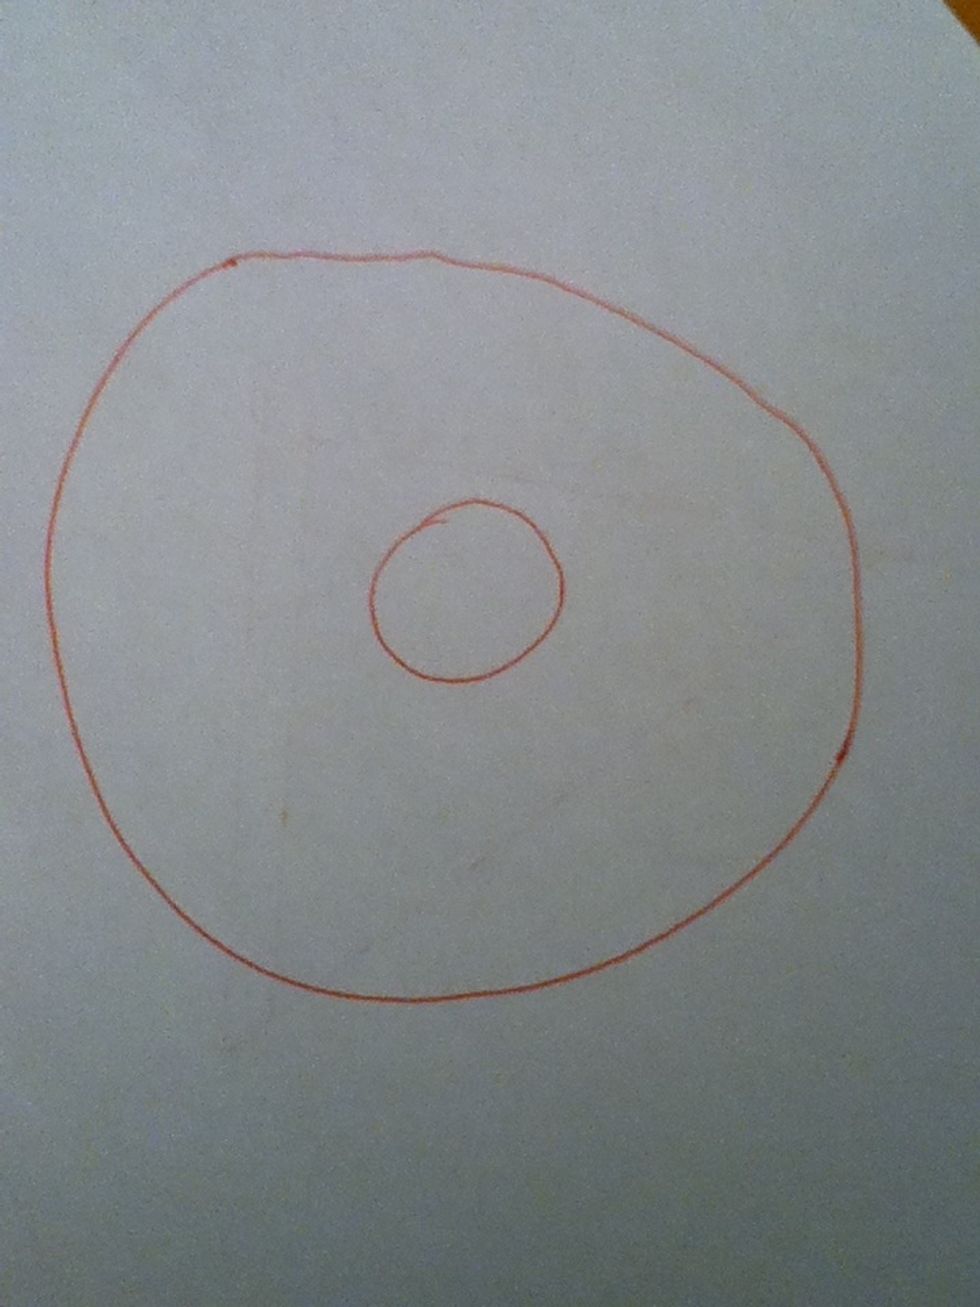 How to draw two circles without lifting your pen B+C Guides